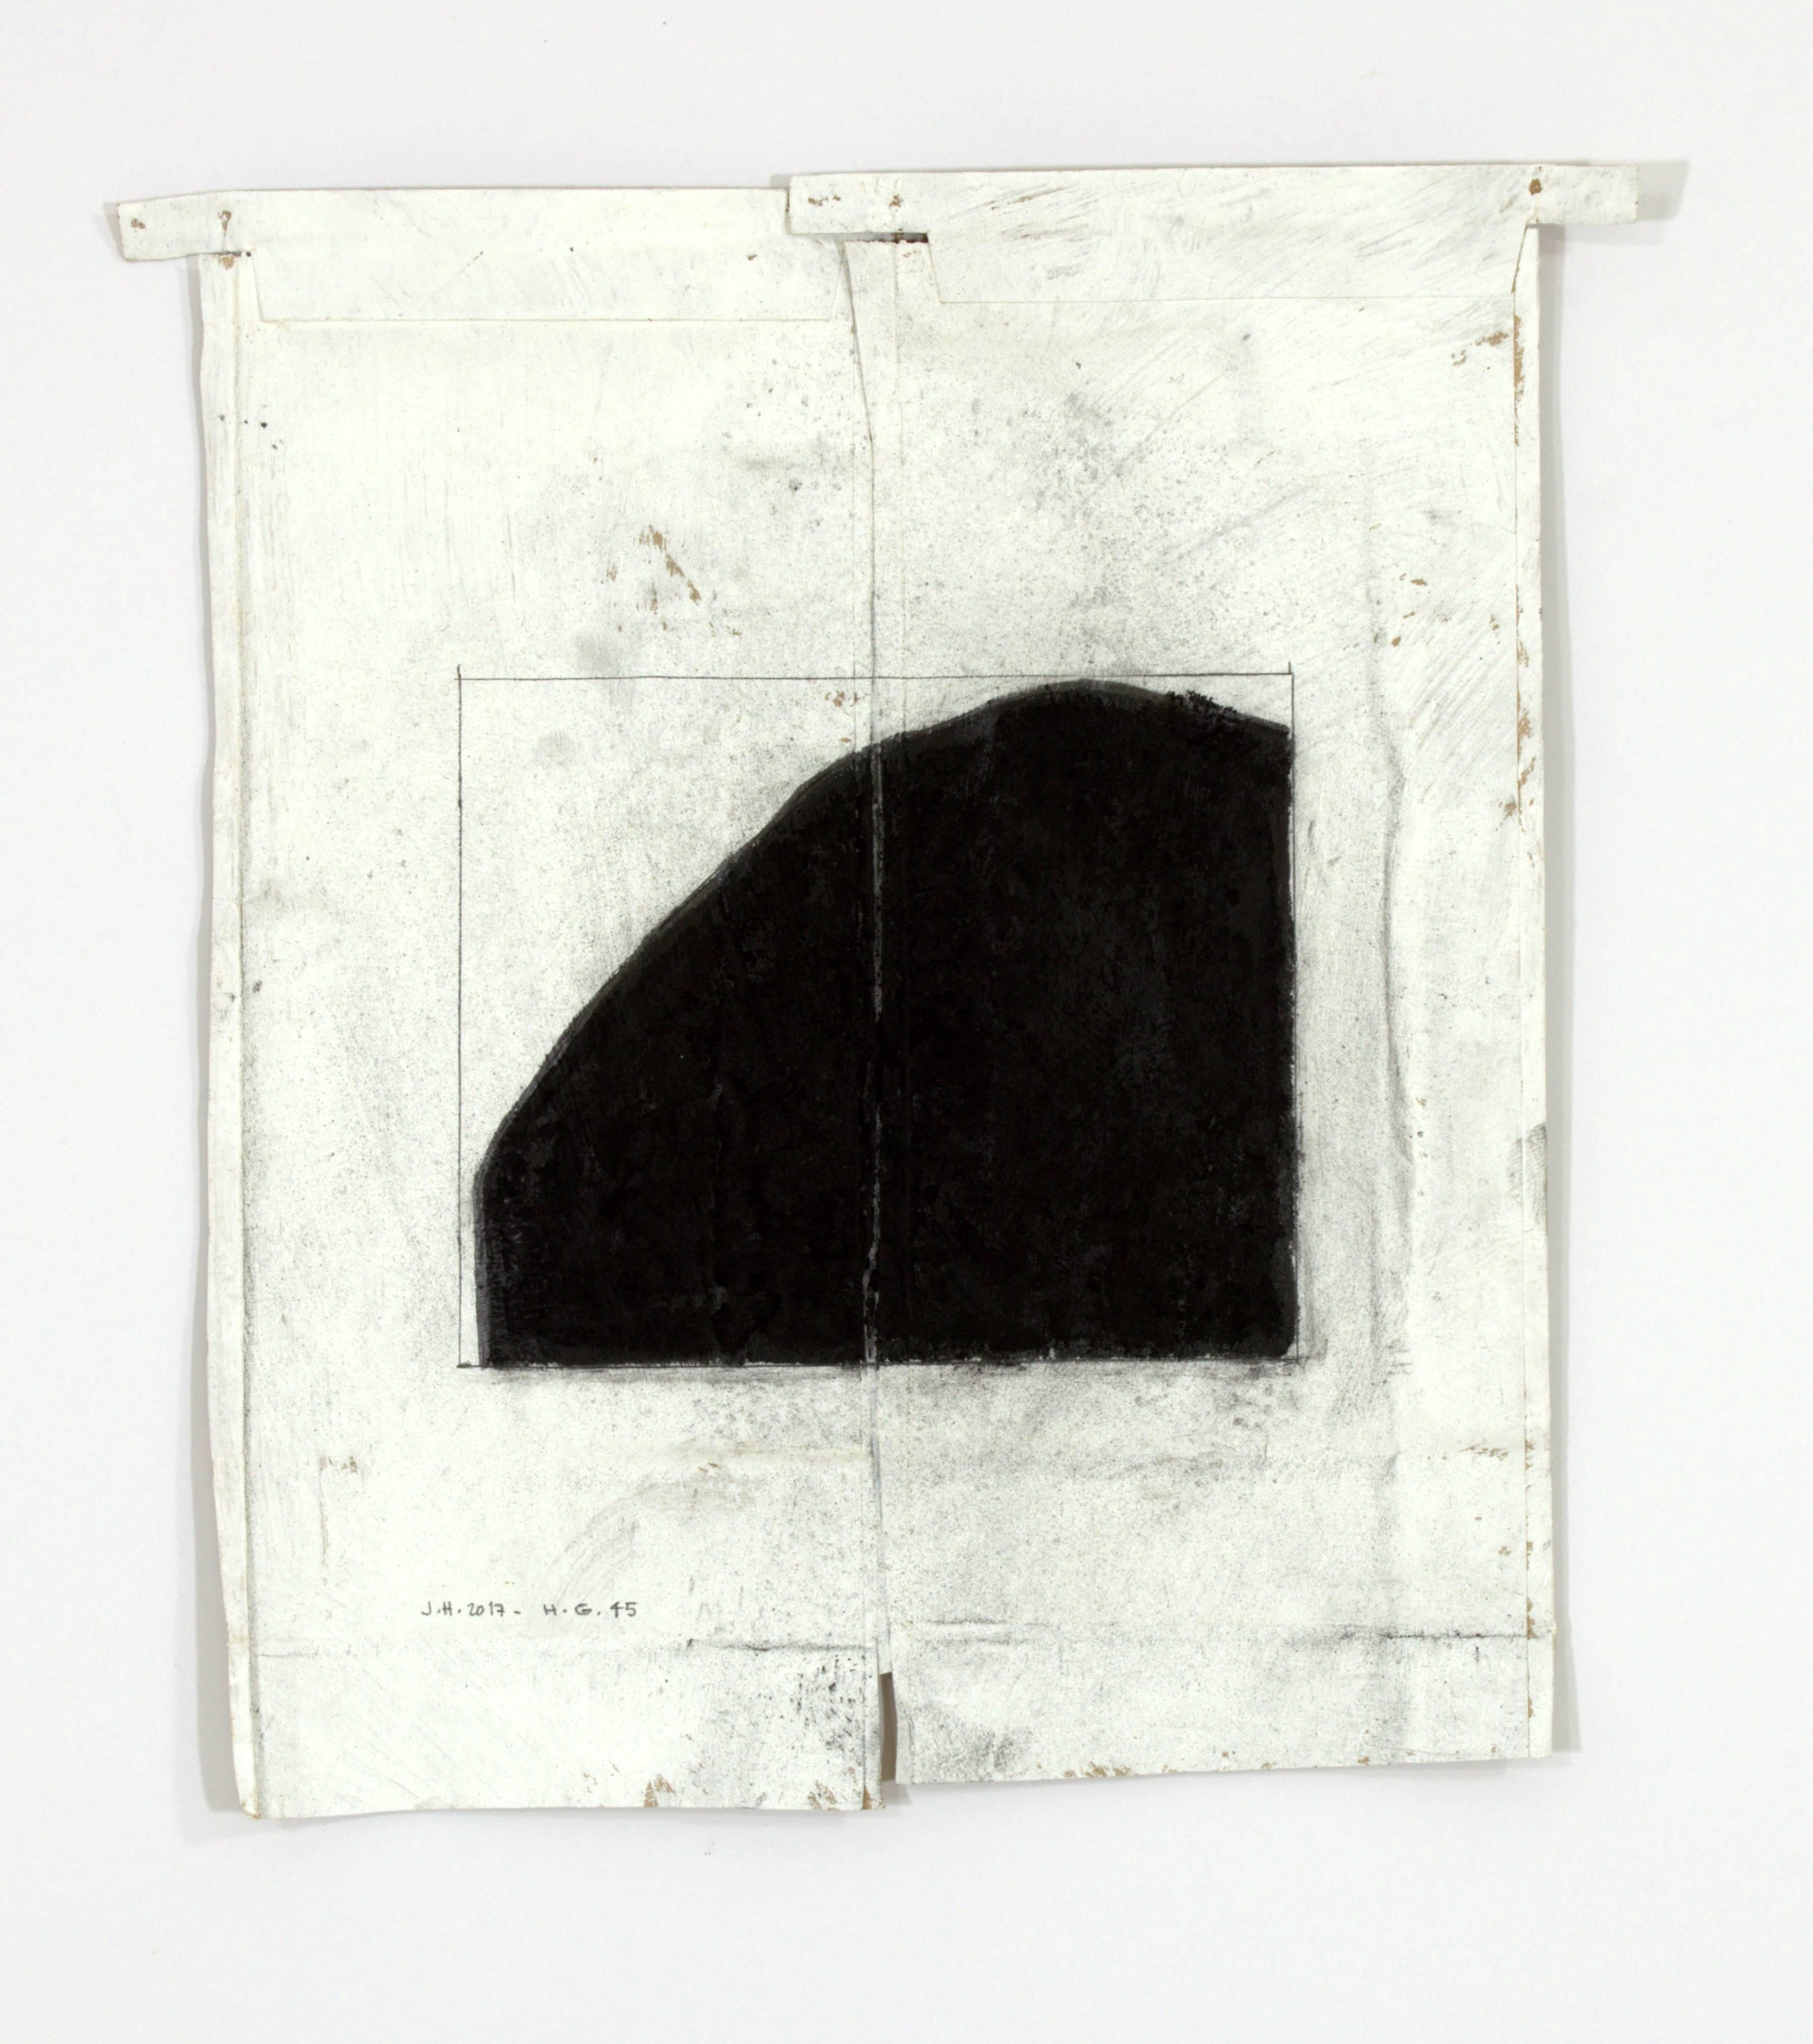 Jesse Hickman works intuitively, making abstract, painted sculptural objects and works on paper. Most of his current works are small scale and hang from the wall. This newest series Higher Grounds are charcoal and graphite drawings created from used